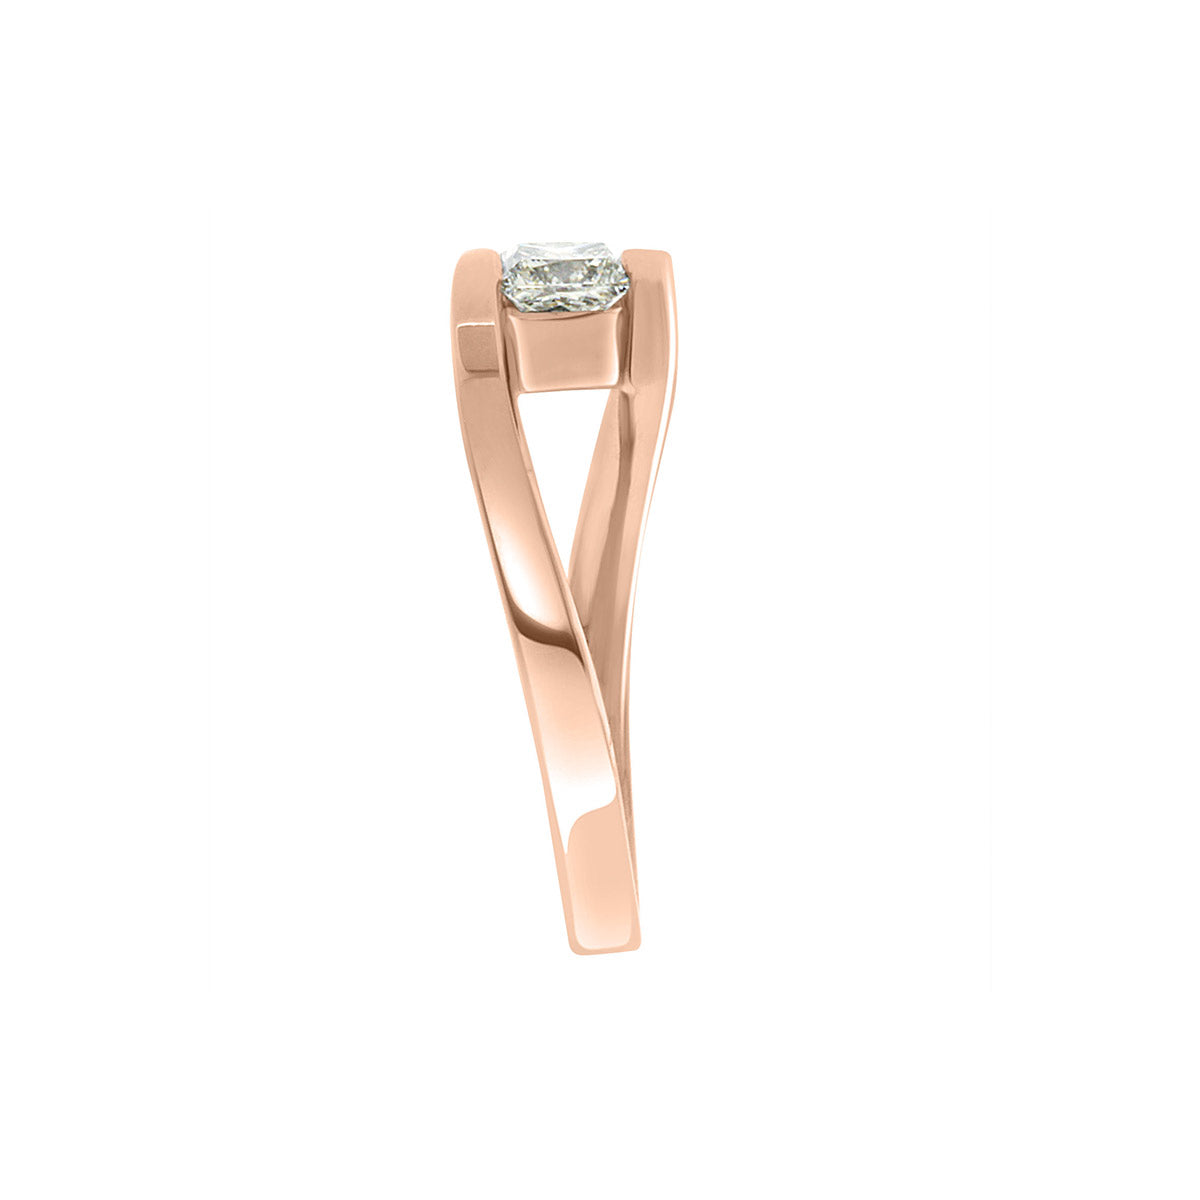 Princess Solitaire Engagement Ring in a rose gold tension setting end view